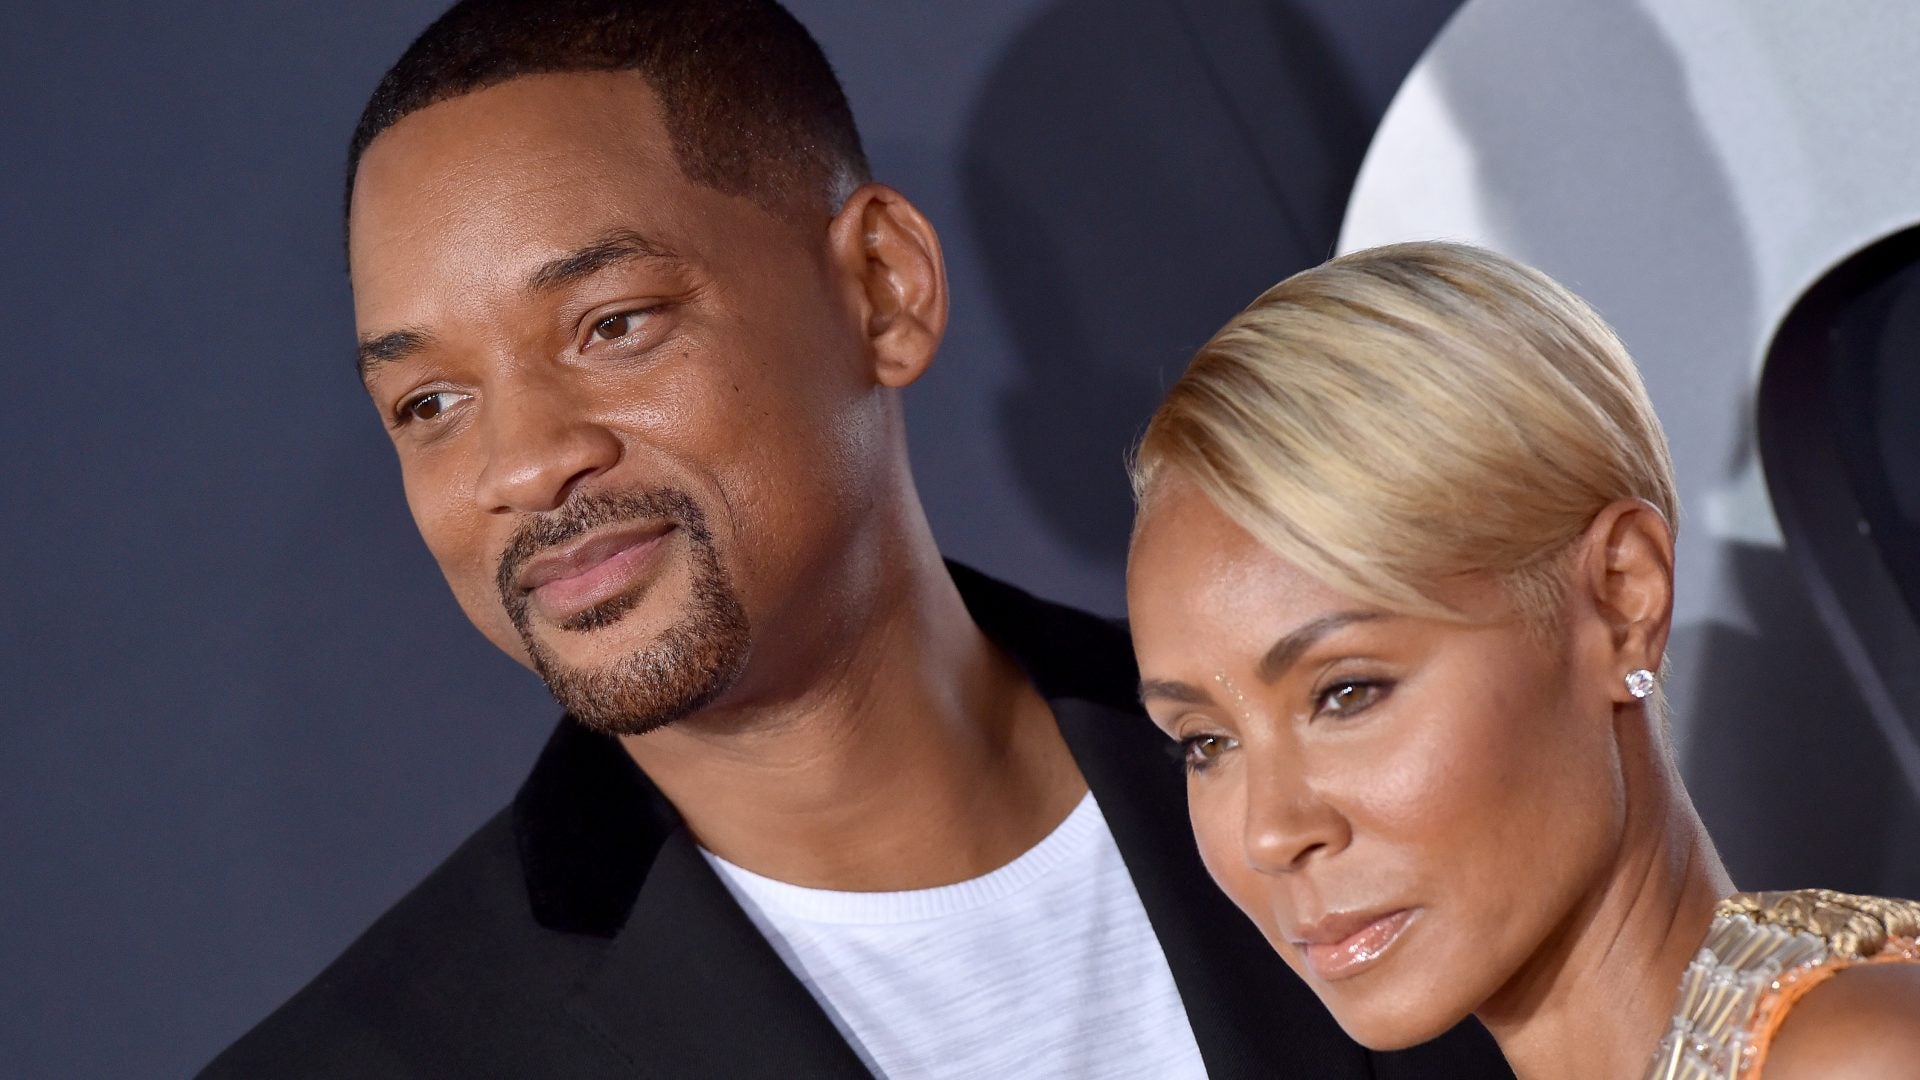 10 Celebrity Couples Who Keep It 100 About The Ups and Downs Of Marriage